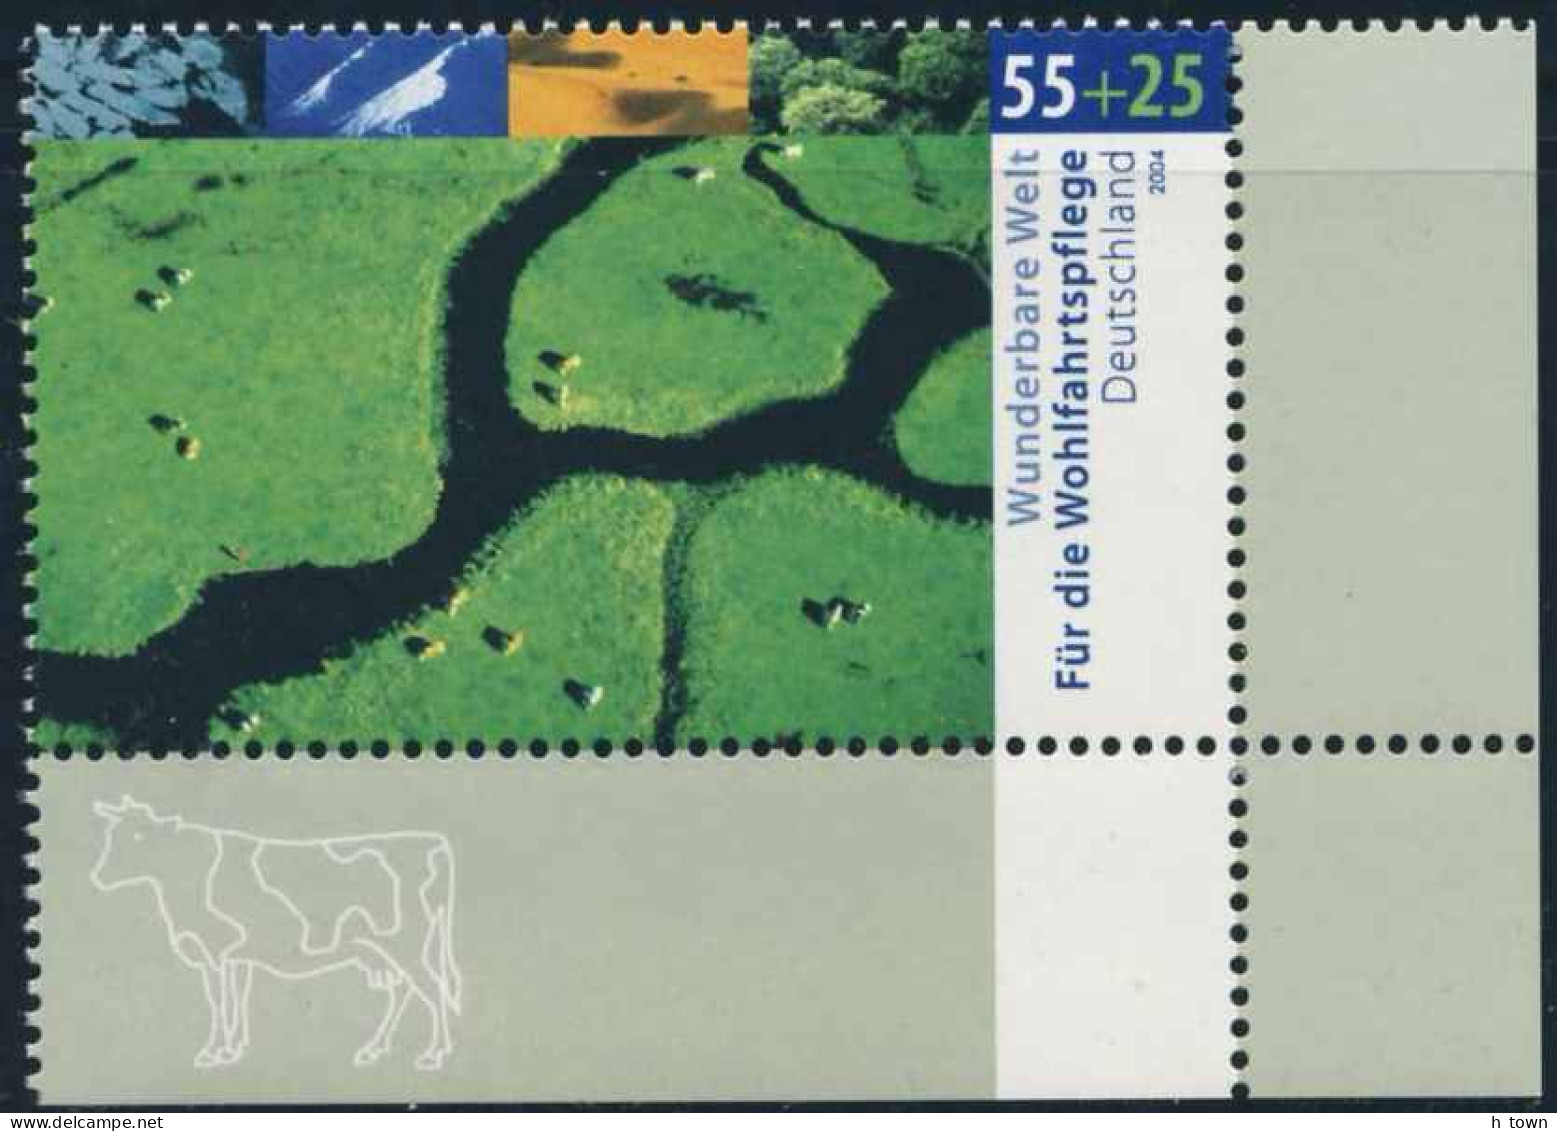 820  Vache: Timbre "Climat Tempéré" D'Allemagne - Cow On Margin Of The "Temperate Climate"-stamp From Germany - Vaches